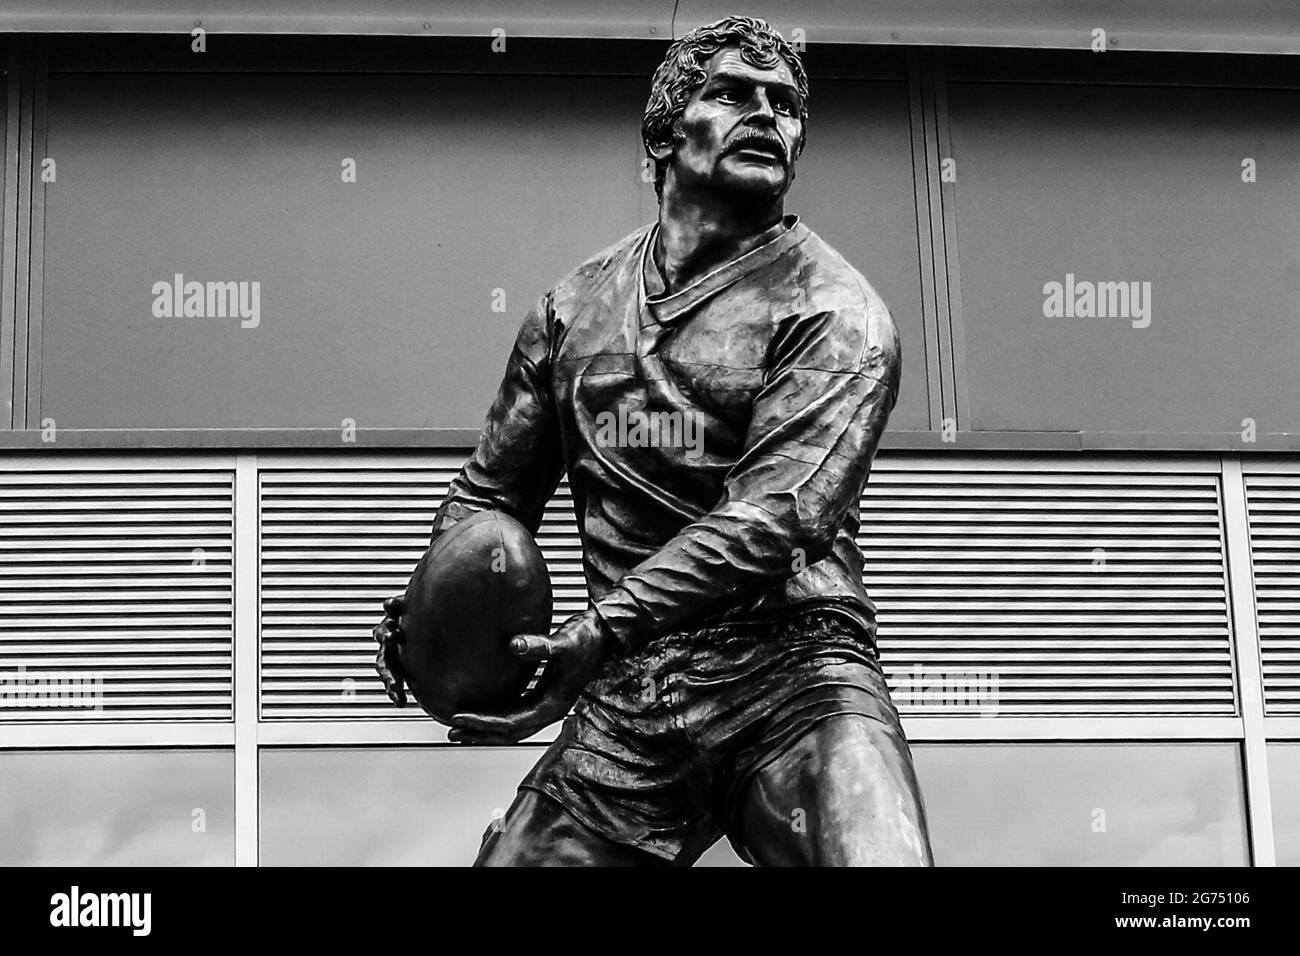 Emerald Headingley Stadium, Leeds, West Yorkshire, 11th July 2021. John Holmes Statue- Unveiling at the Emerald Headingley Stadium, Leeds. The first statue in the 130 years history of Emerald Headingley Stadium with the John Holmes Statue taking its place in front of the South Stand. John Holmes remains one of the greatest players to have ever played for Leeds Rugby League having played for over two decades for his home town club. Credit: Touchlinepics/Alamy Live News Stock Photo